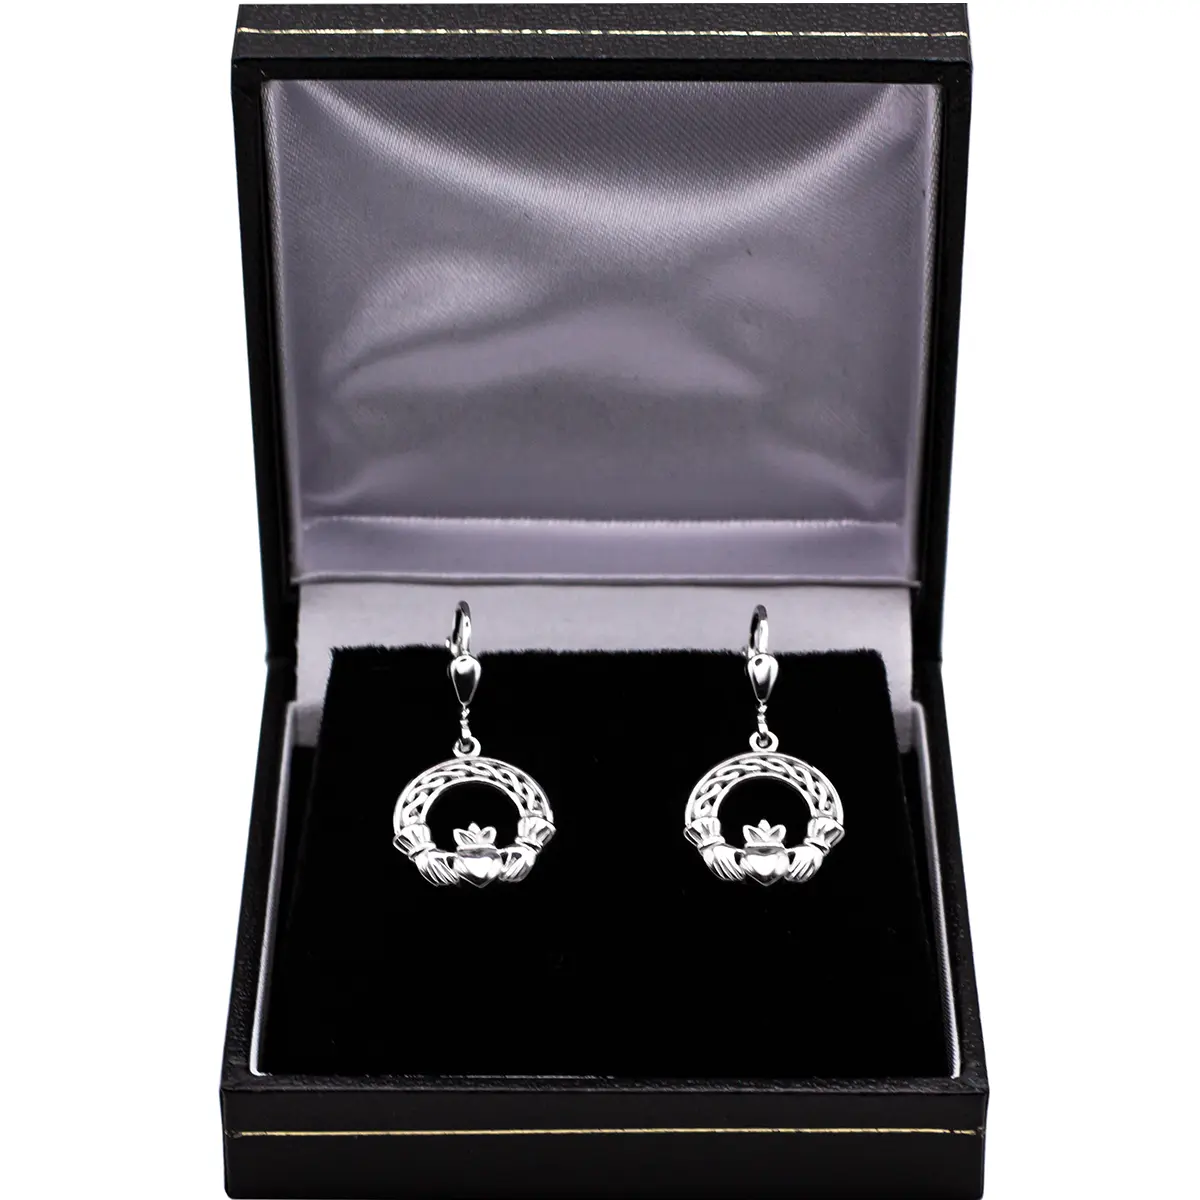 Silver Claddagh Drop Earrings With Celtic Knotwork